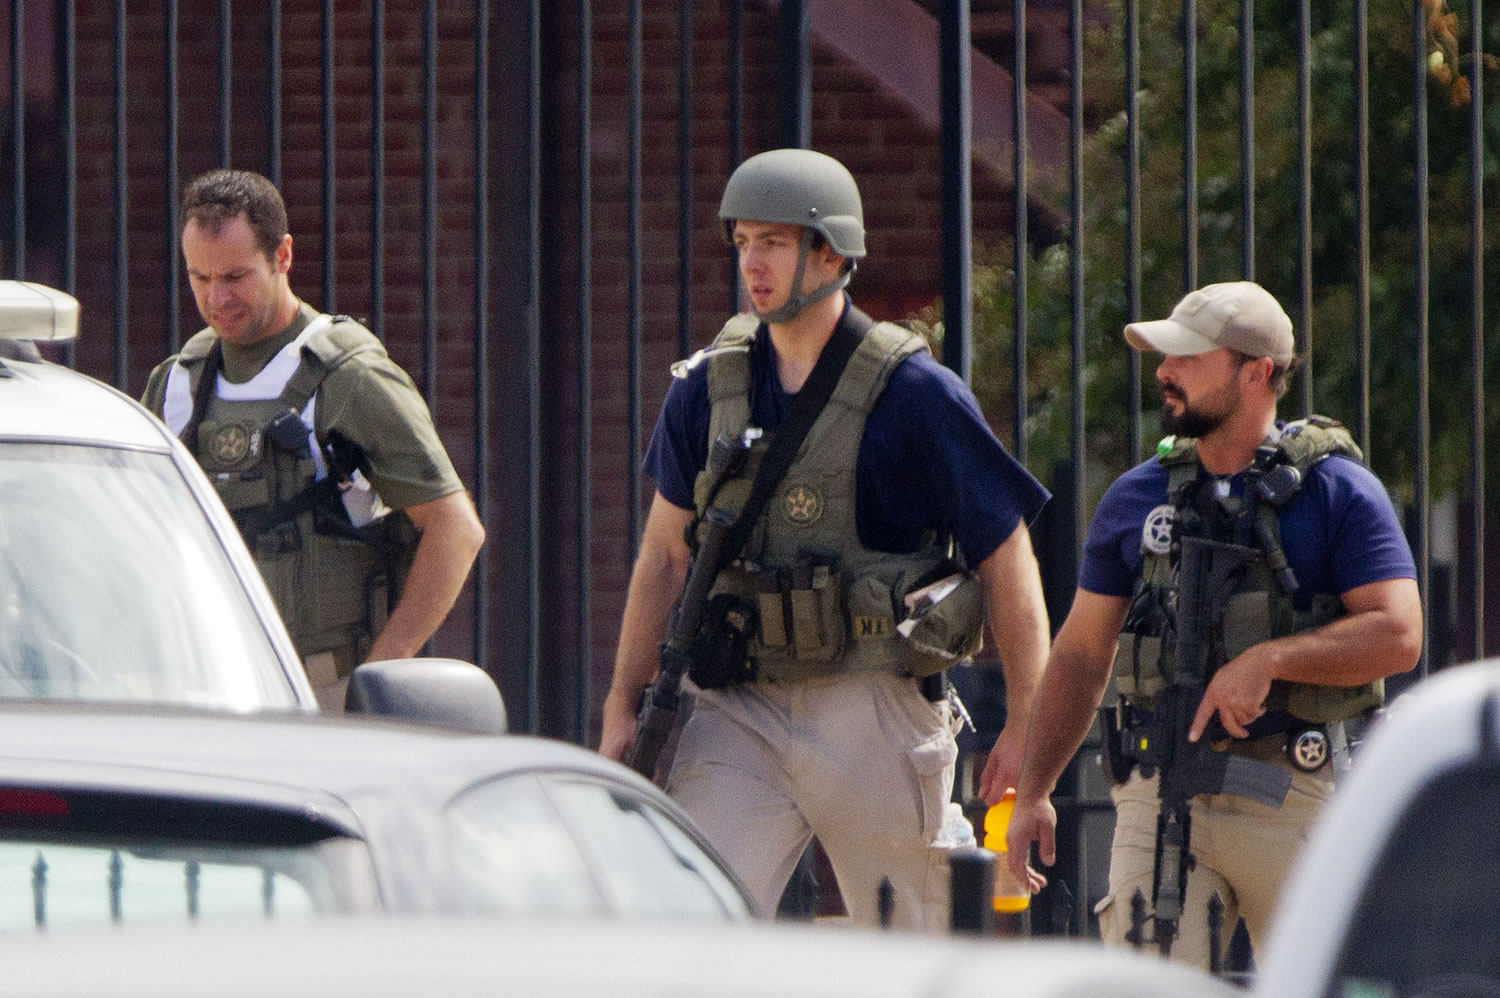 Armed U.S. Marshals leave the scene where a gunman was reported at the Washington Navy Yard in Washington, on Monday.